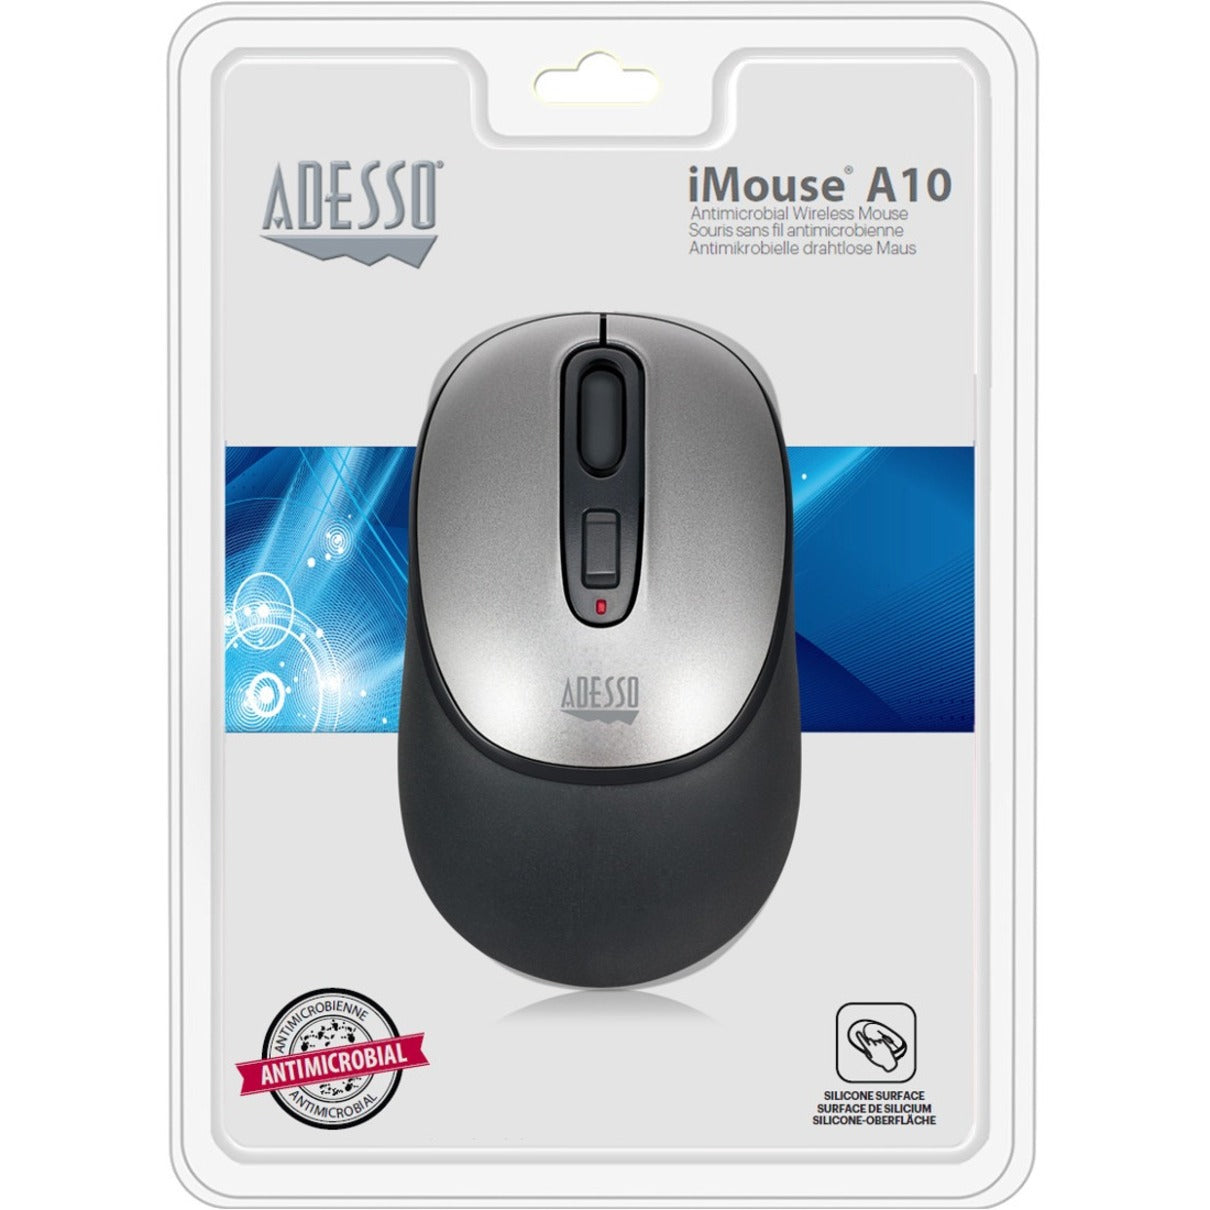 Adesso IMOUSE A10 Antimicrobial Wireless Mouse, Ergonomic Fit, 1600 dpi, 2.4 GHz